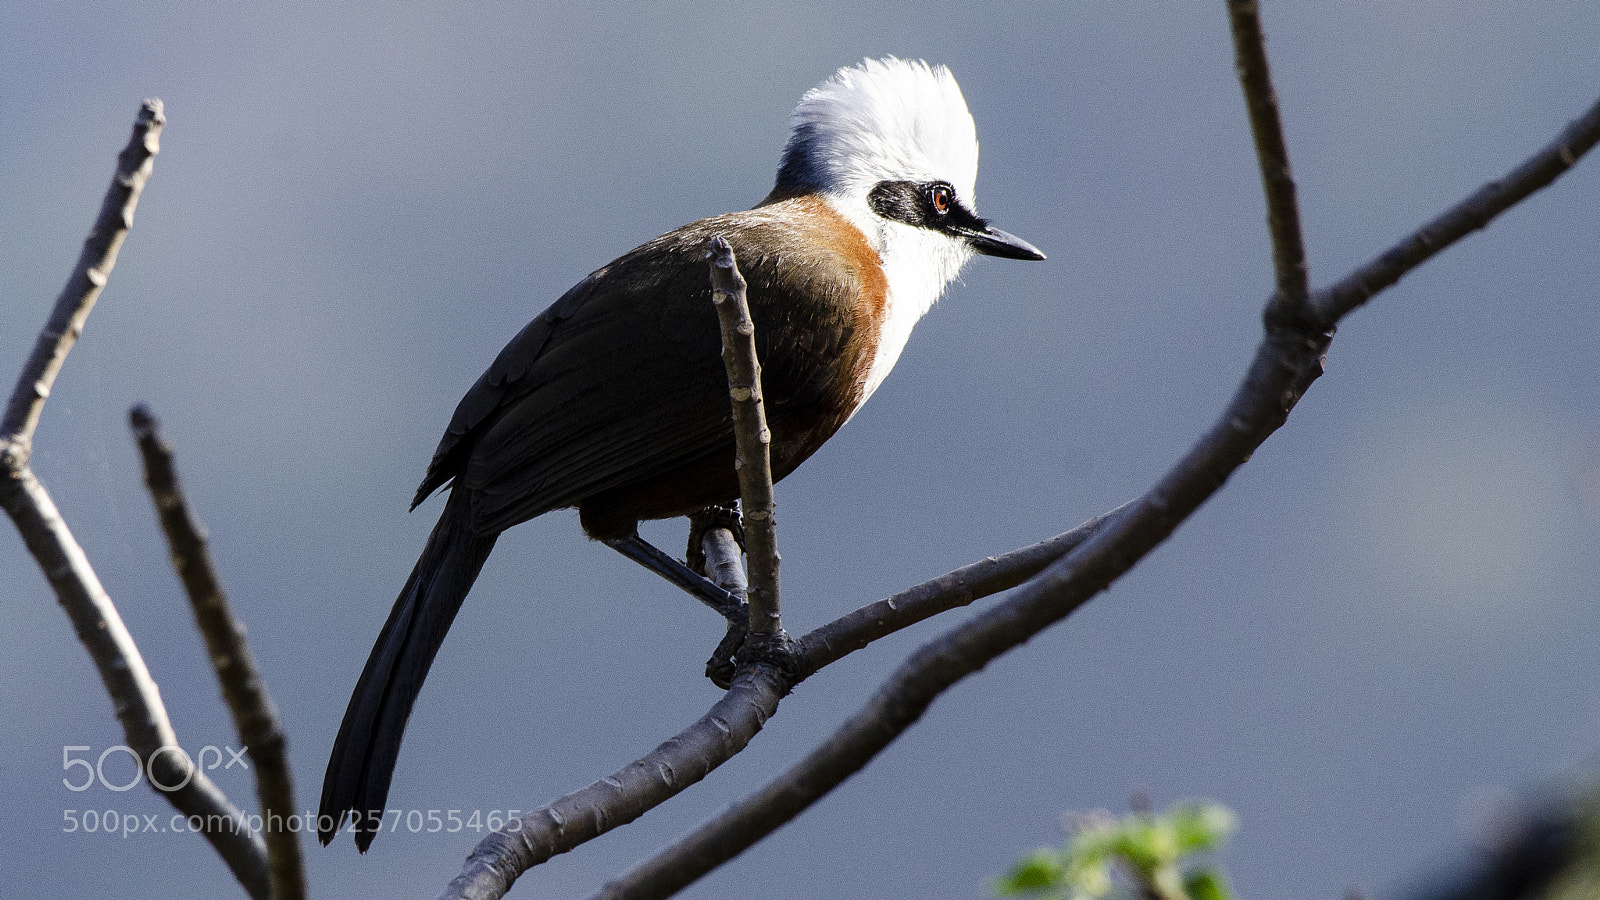 Nikon D7000 sample photo. White-crested laughing thrush photography